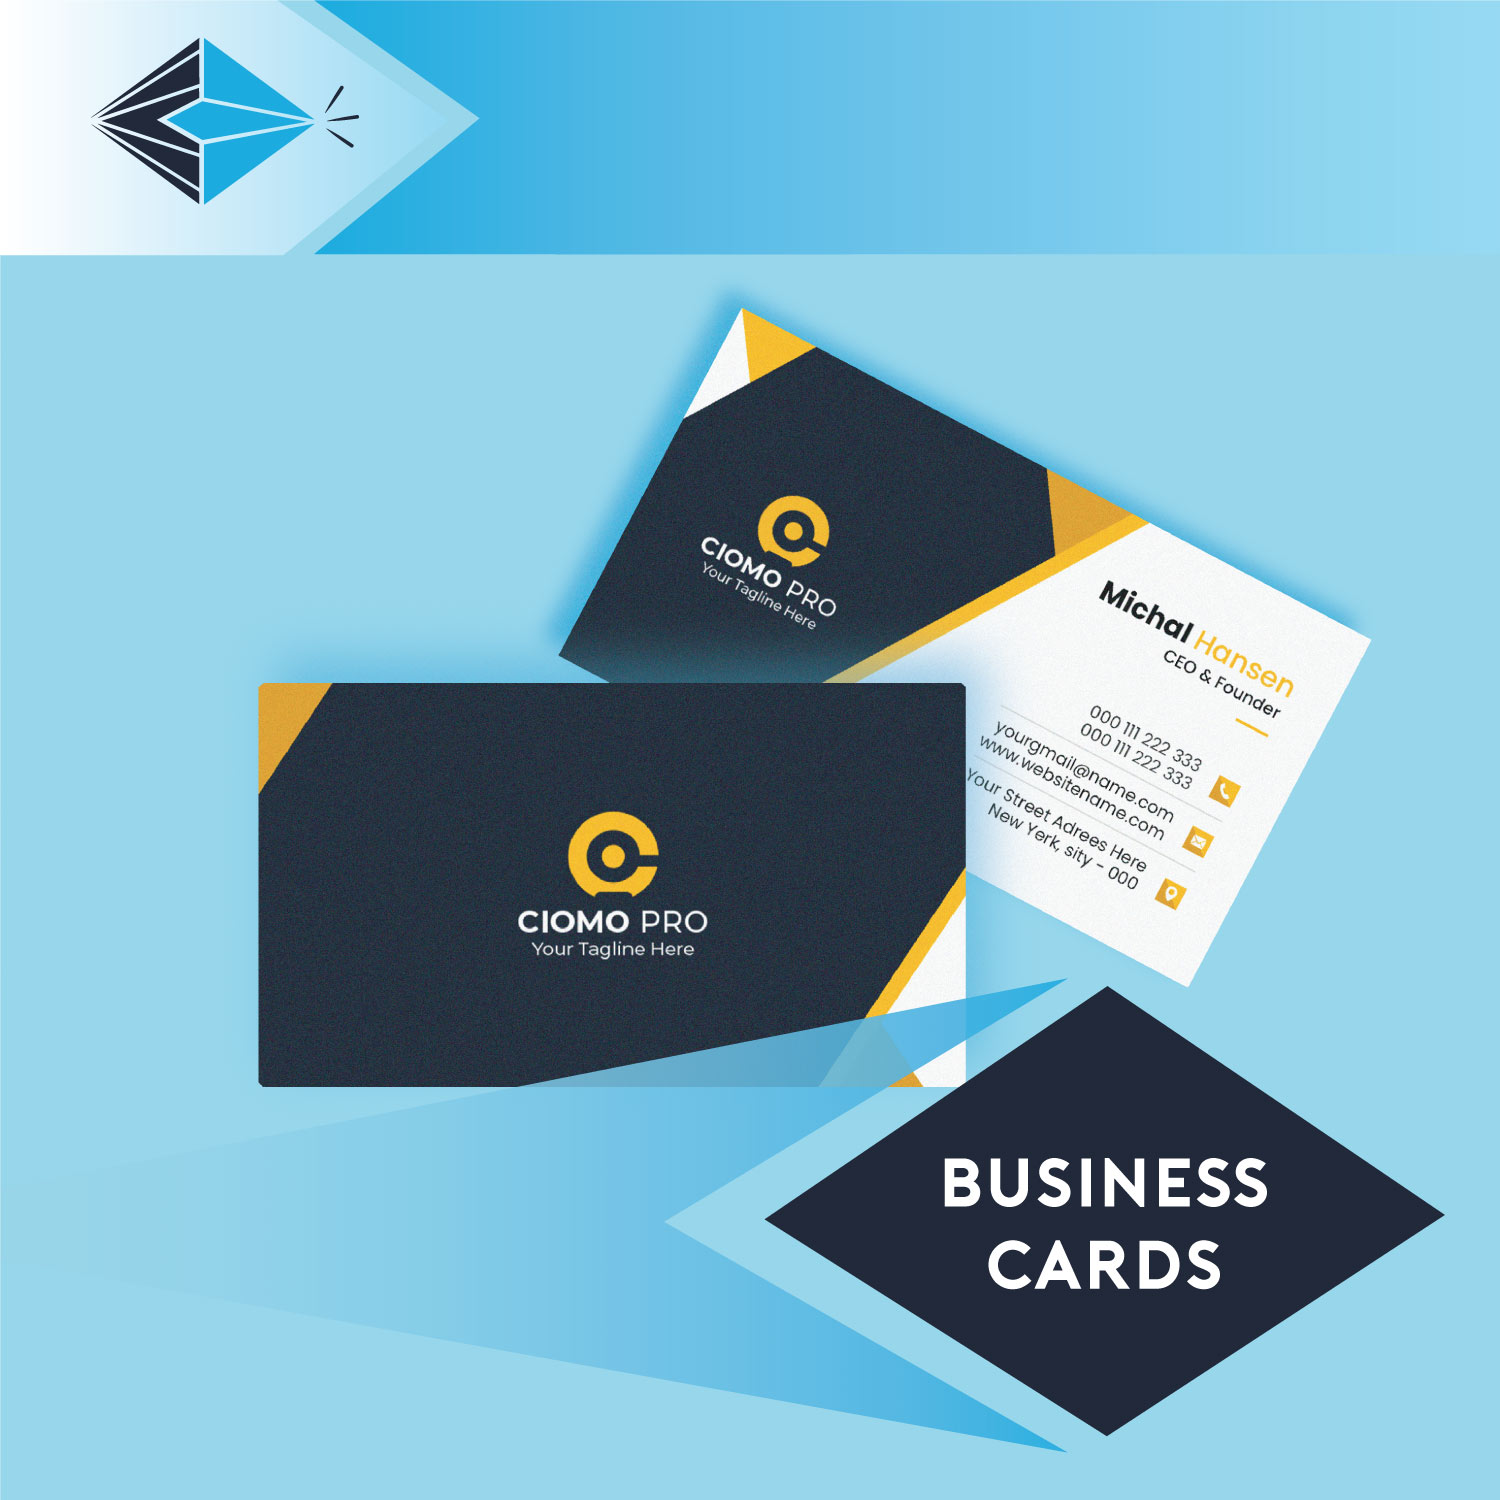 Standard 450gsm business cards silk gloss soft touch printing Stockport